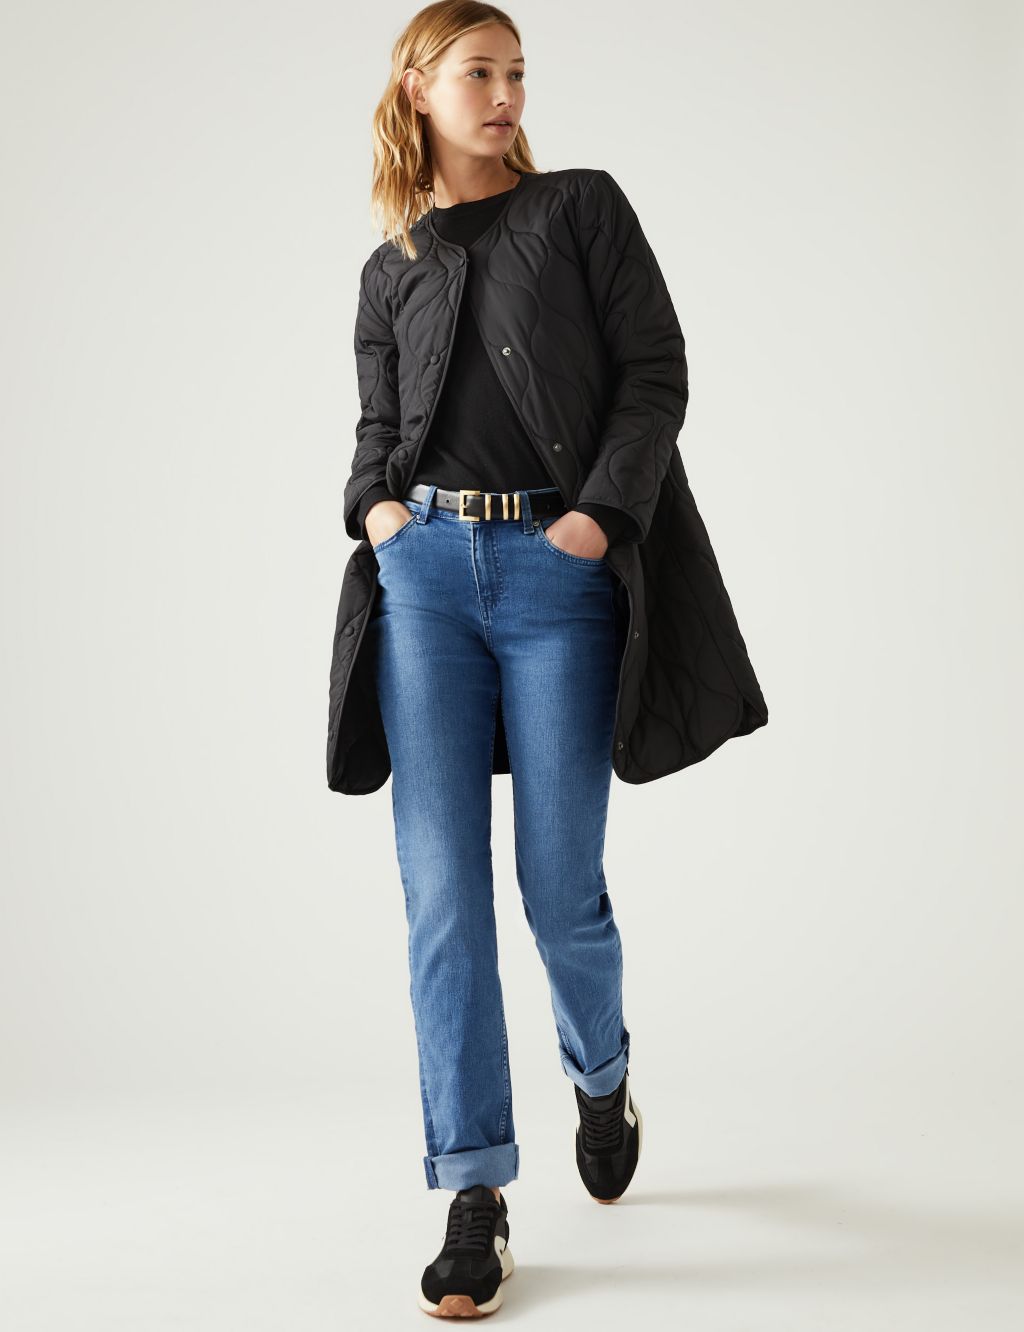 Sienna Straight Leg Jeans with Stretch image 1